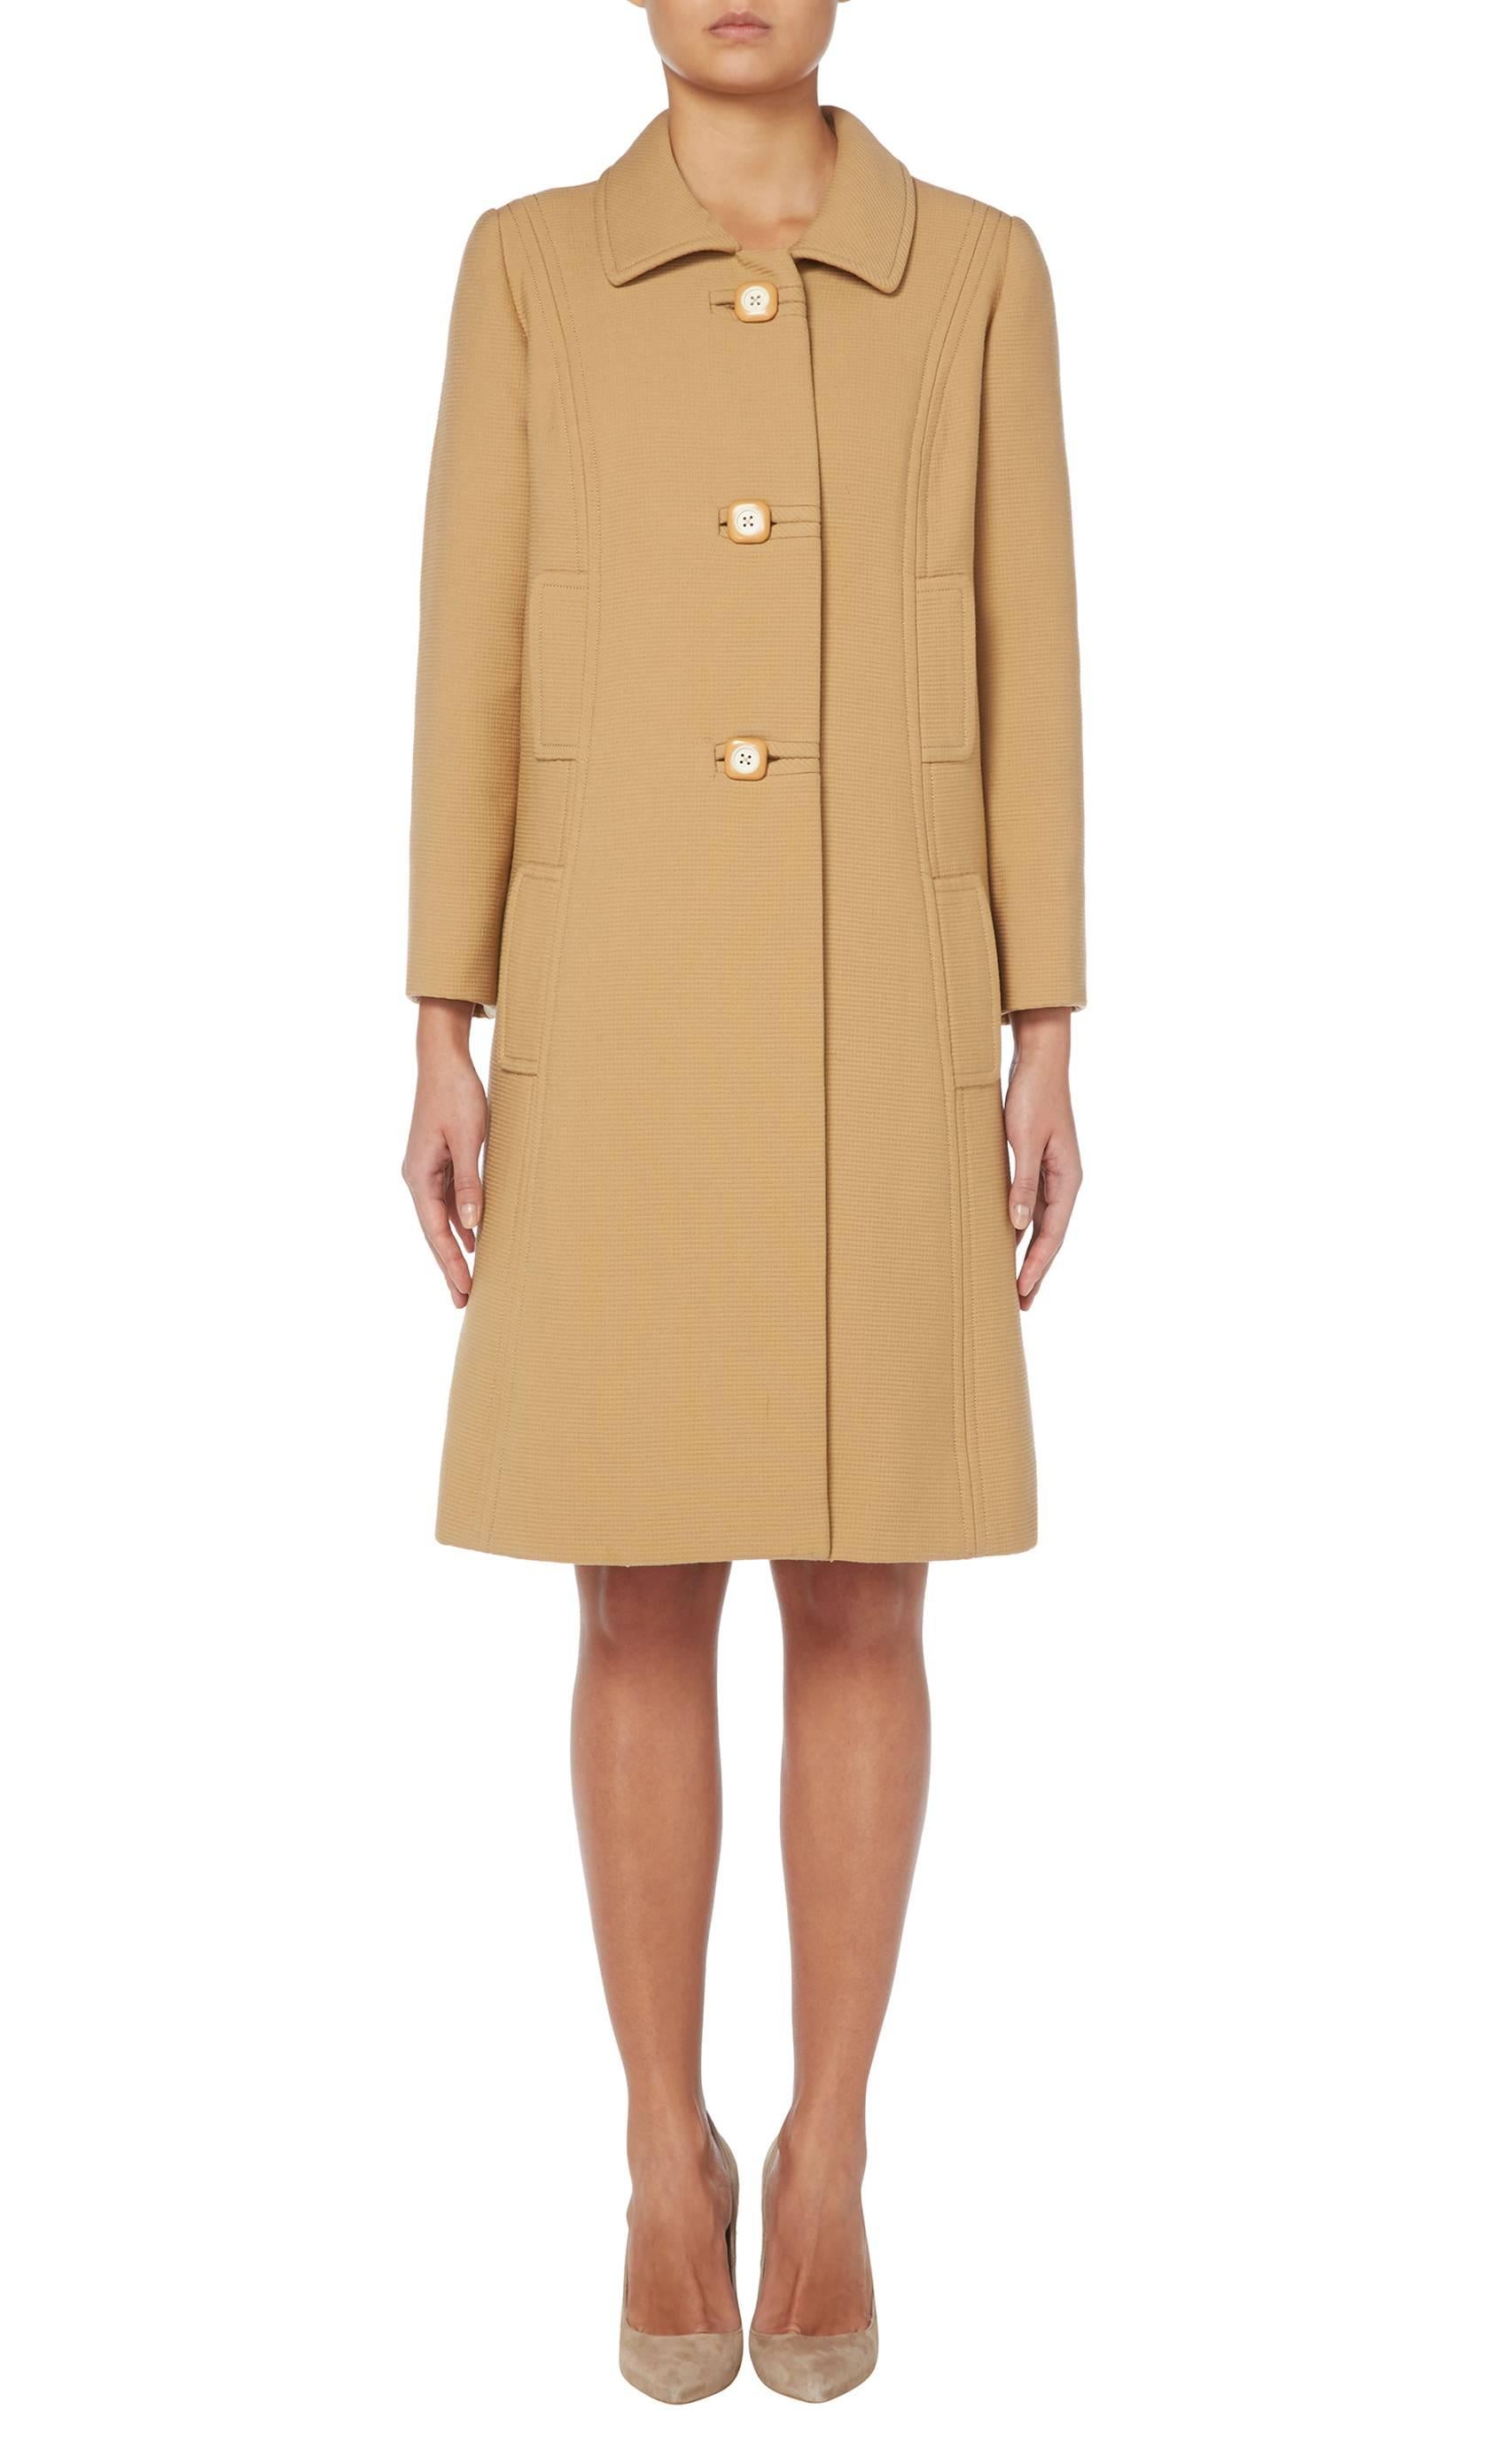 A fantastic wardrobe staple, this Balmain haute couture coat is perfect for all year round. Constructed in camel coloured ribbed wool, the coat has a classic 60s silhouette with a single lapel collar and bracelet length sleeves. The square plastic